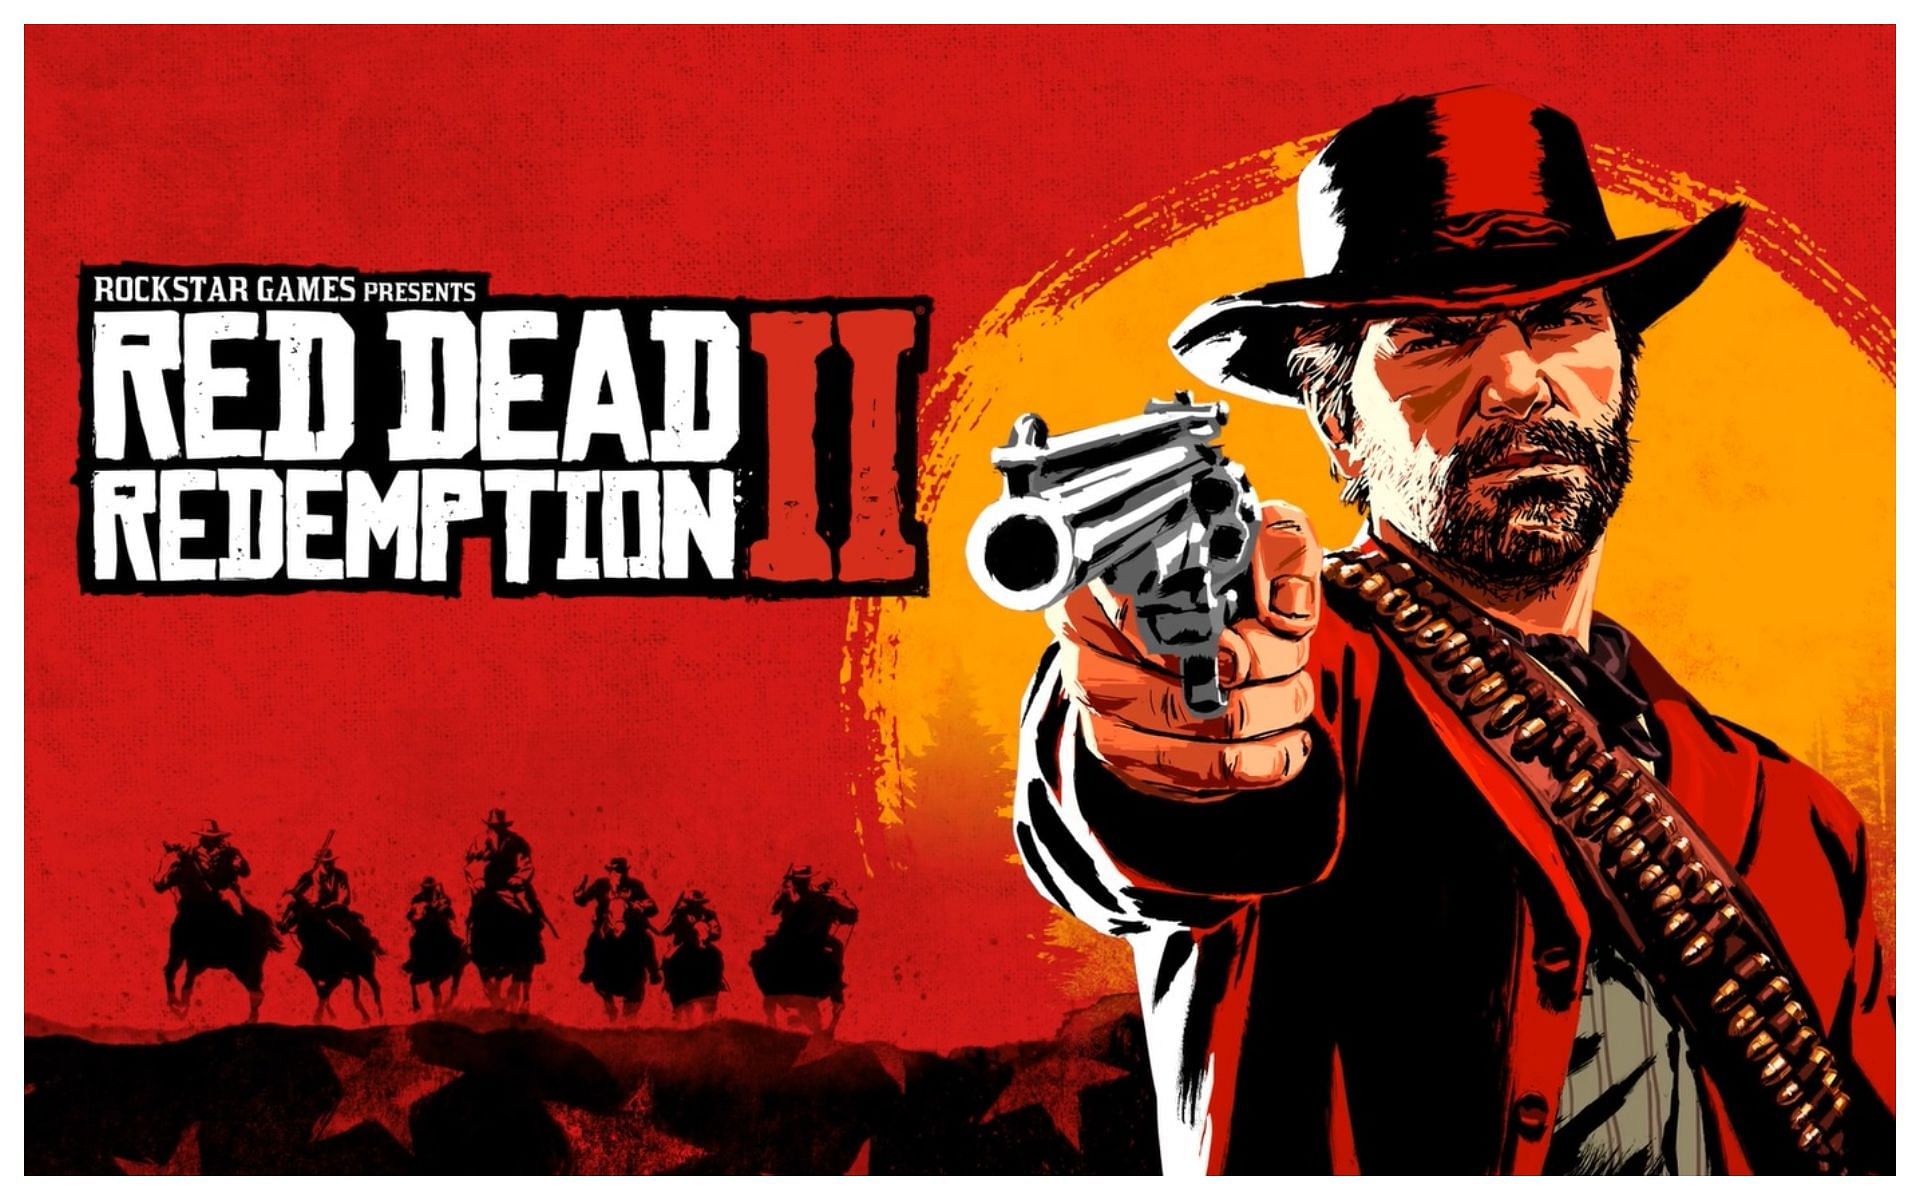 RDR2 has also got pretty amazing discount offers (Images via Rockstar Games)